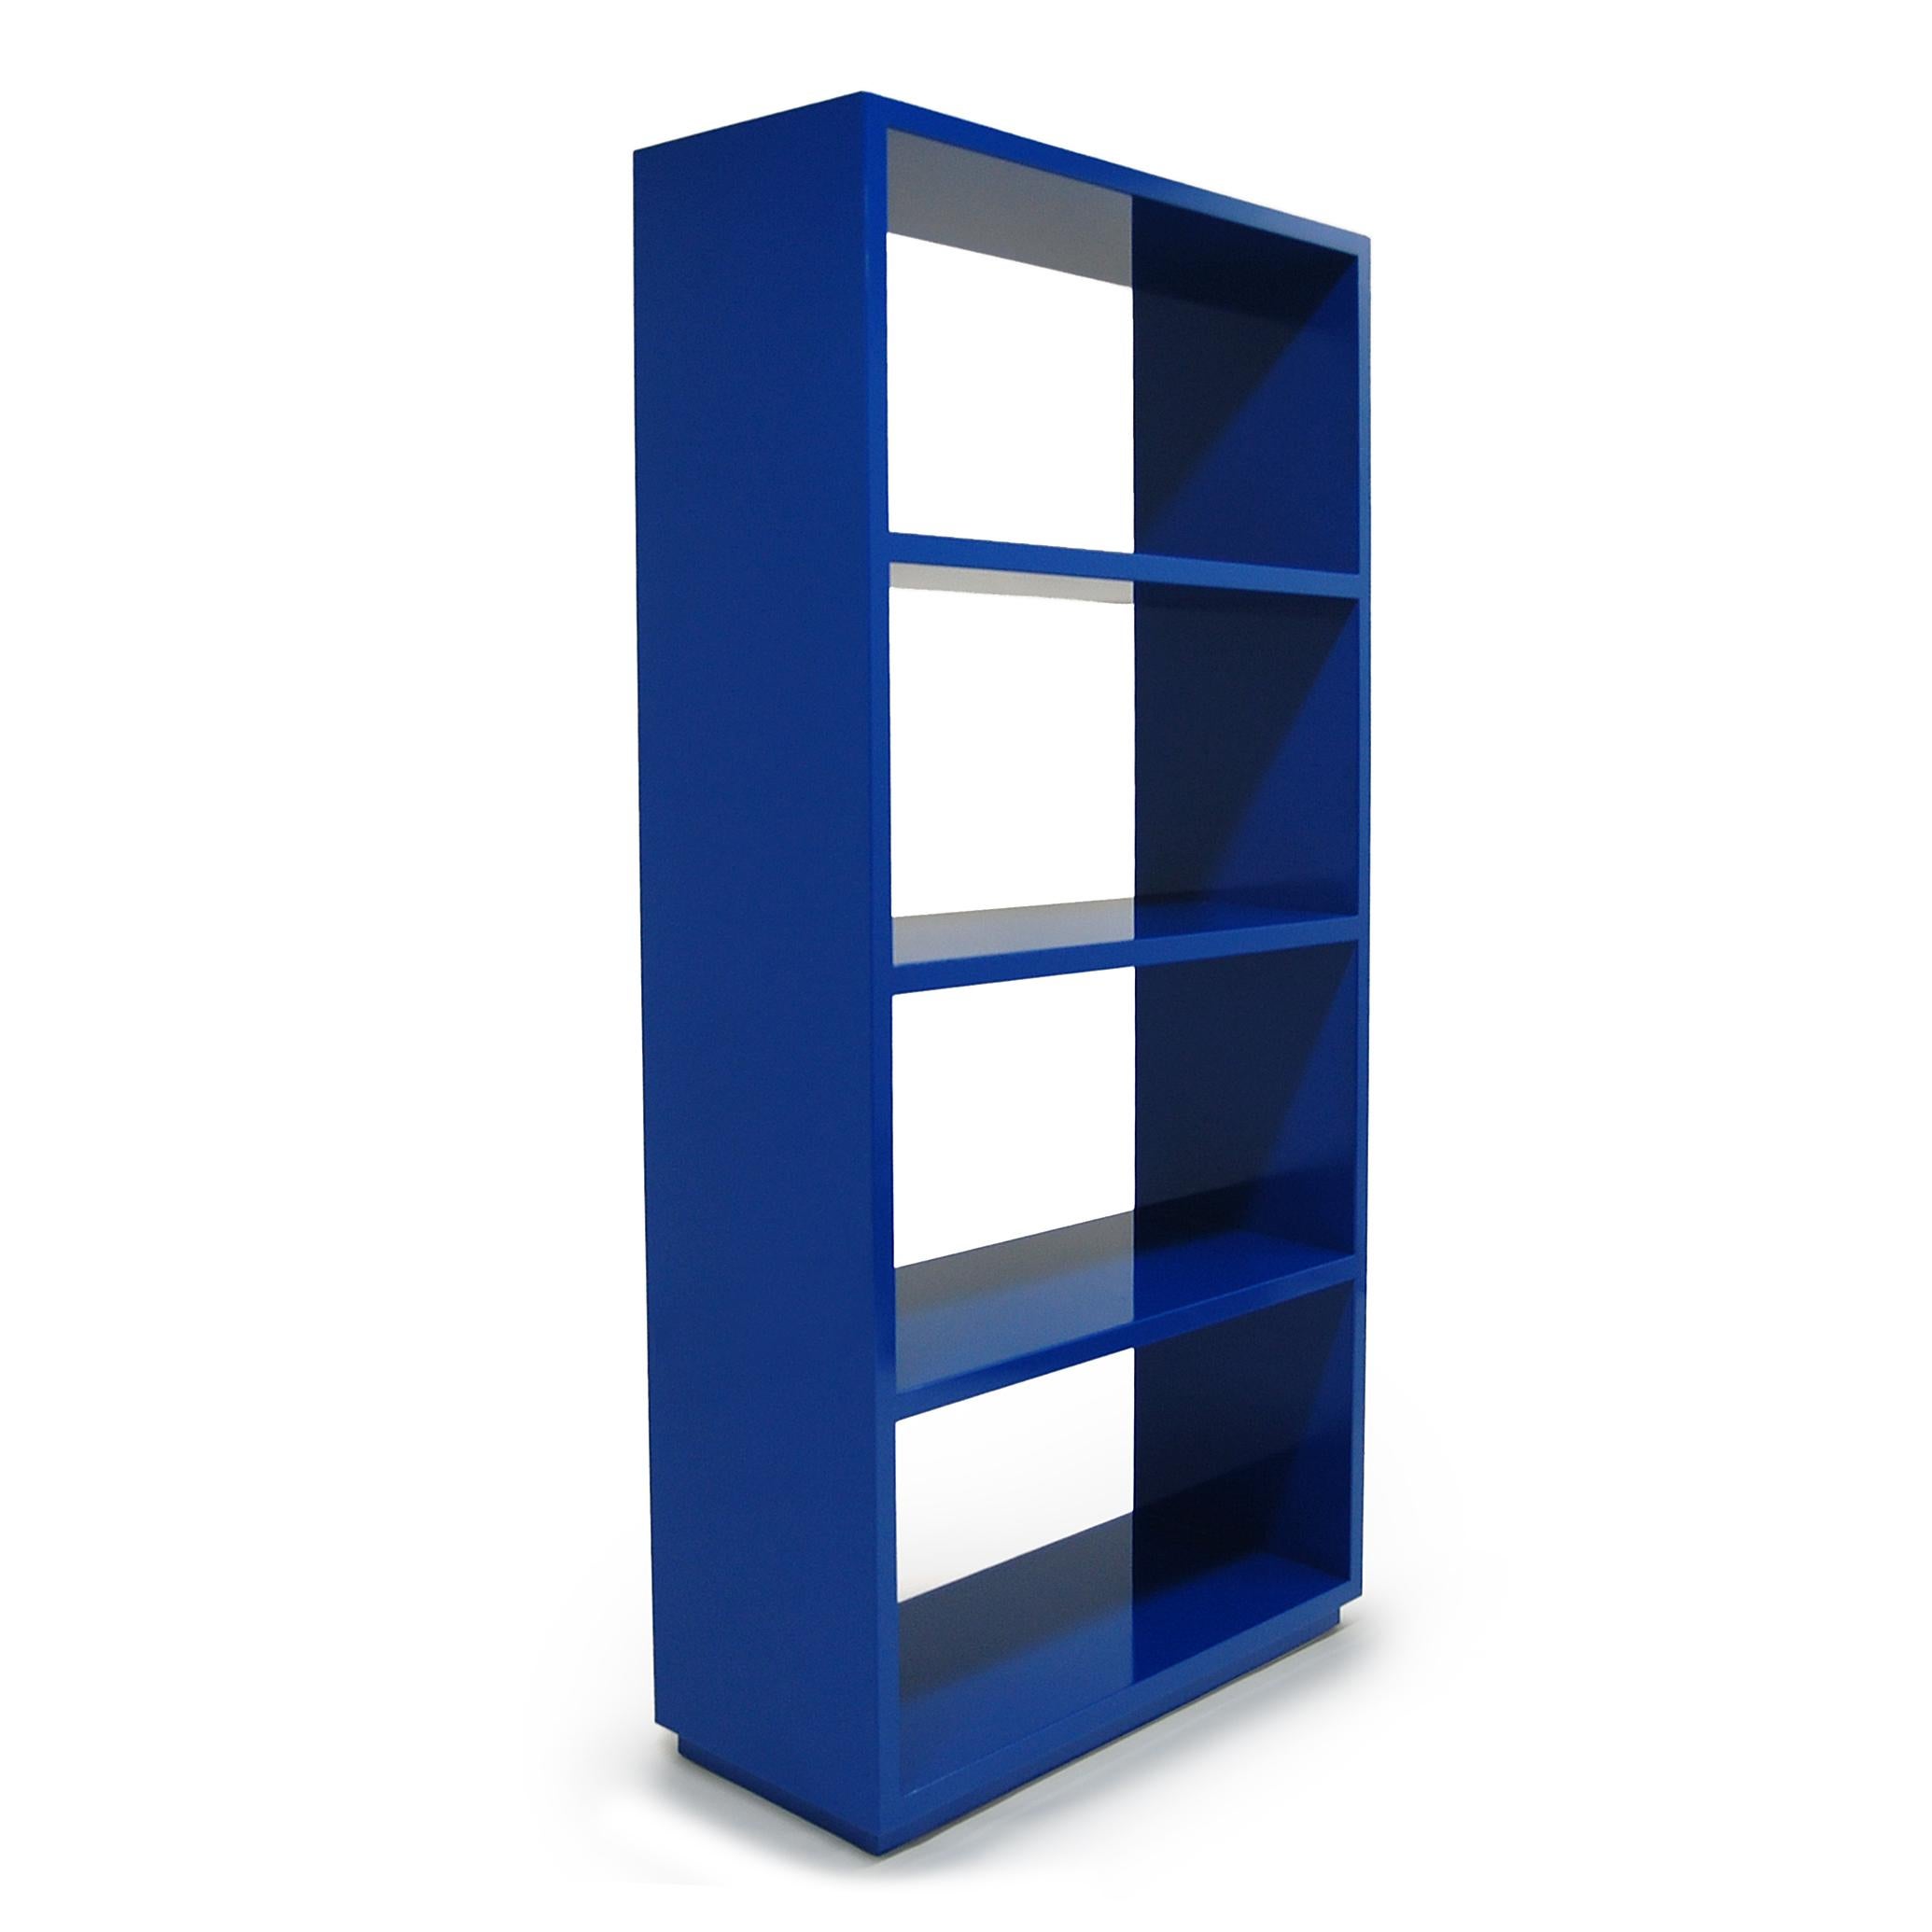 Clean-lined, functional, and versatile, the Jay bookcase gives a room that needed strong jolt of color without going overboard. Detailed with four fixed lacquered shelves it is perfect as a room divider or just a beautiful way to display book